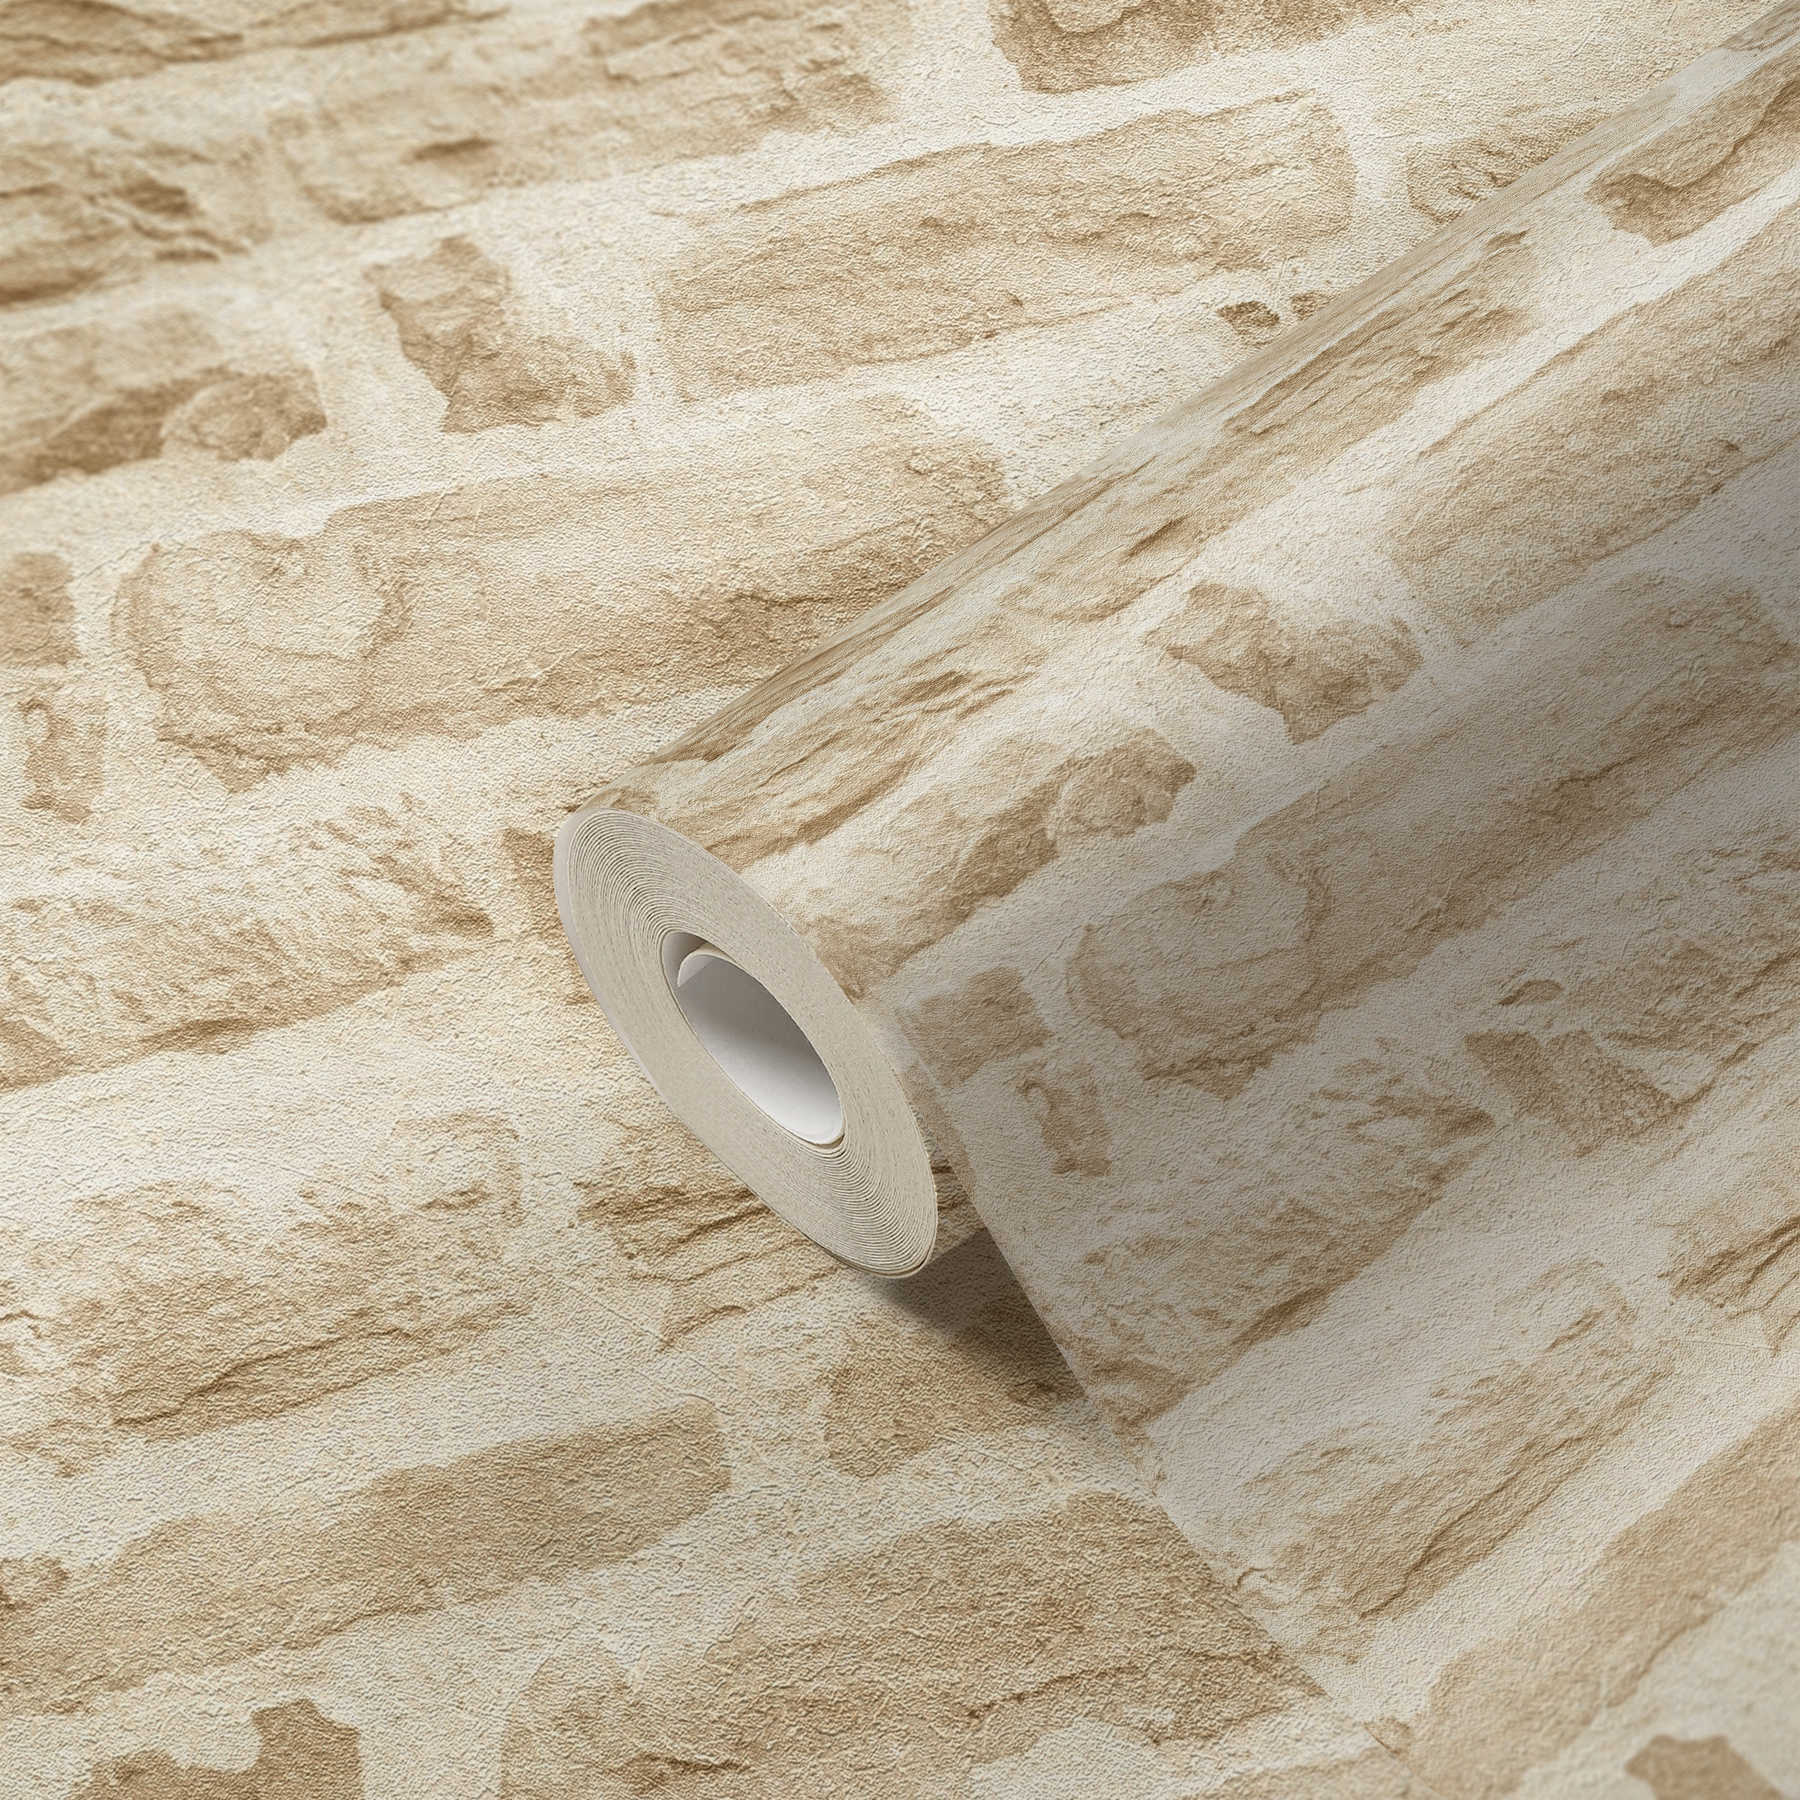             Non-woven wallpaper light beige with natural stone wall look - beige, cream
        